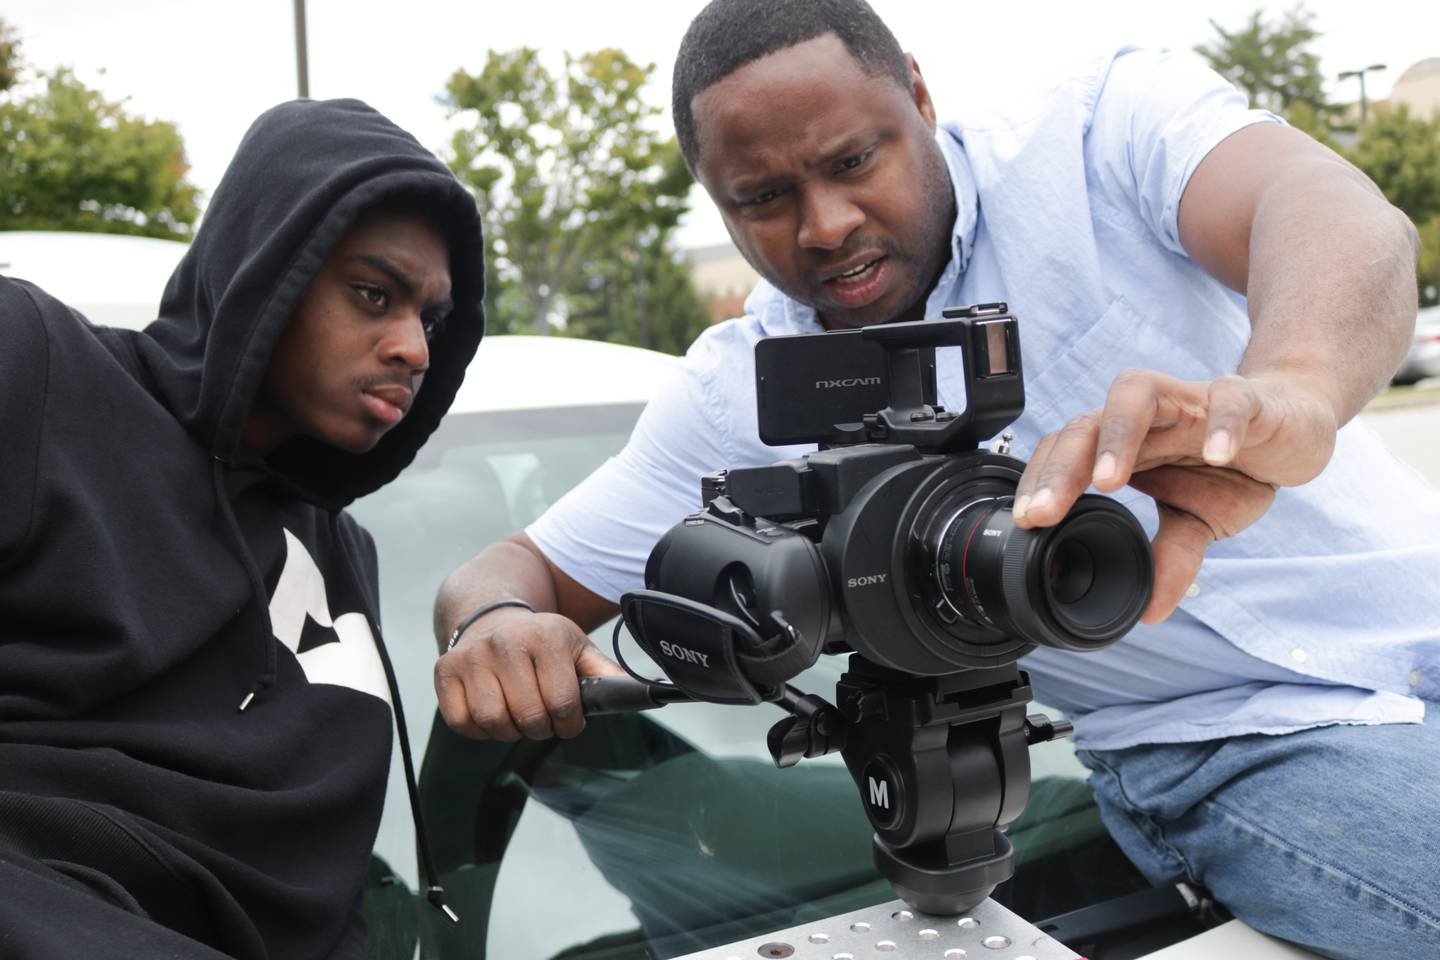 Through Baltimore Youth Film Arts, young people learned the ins and outs of producing films and other art forms.